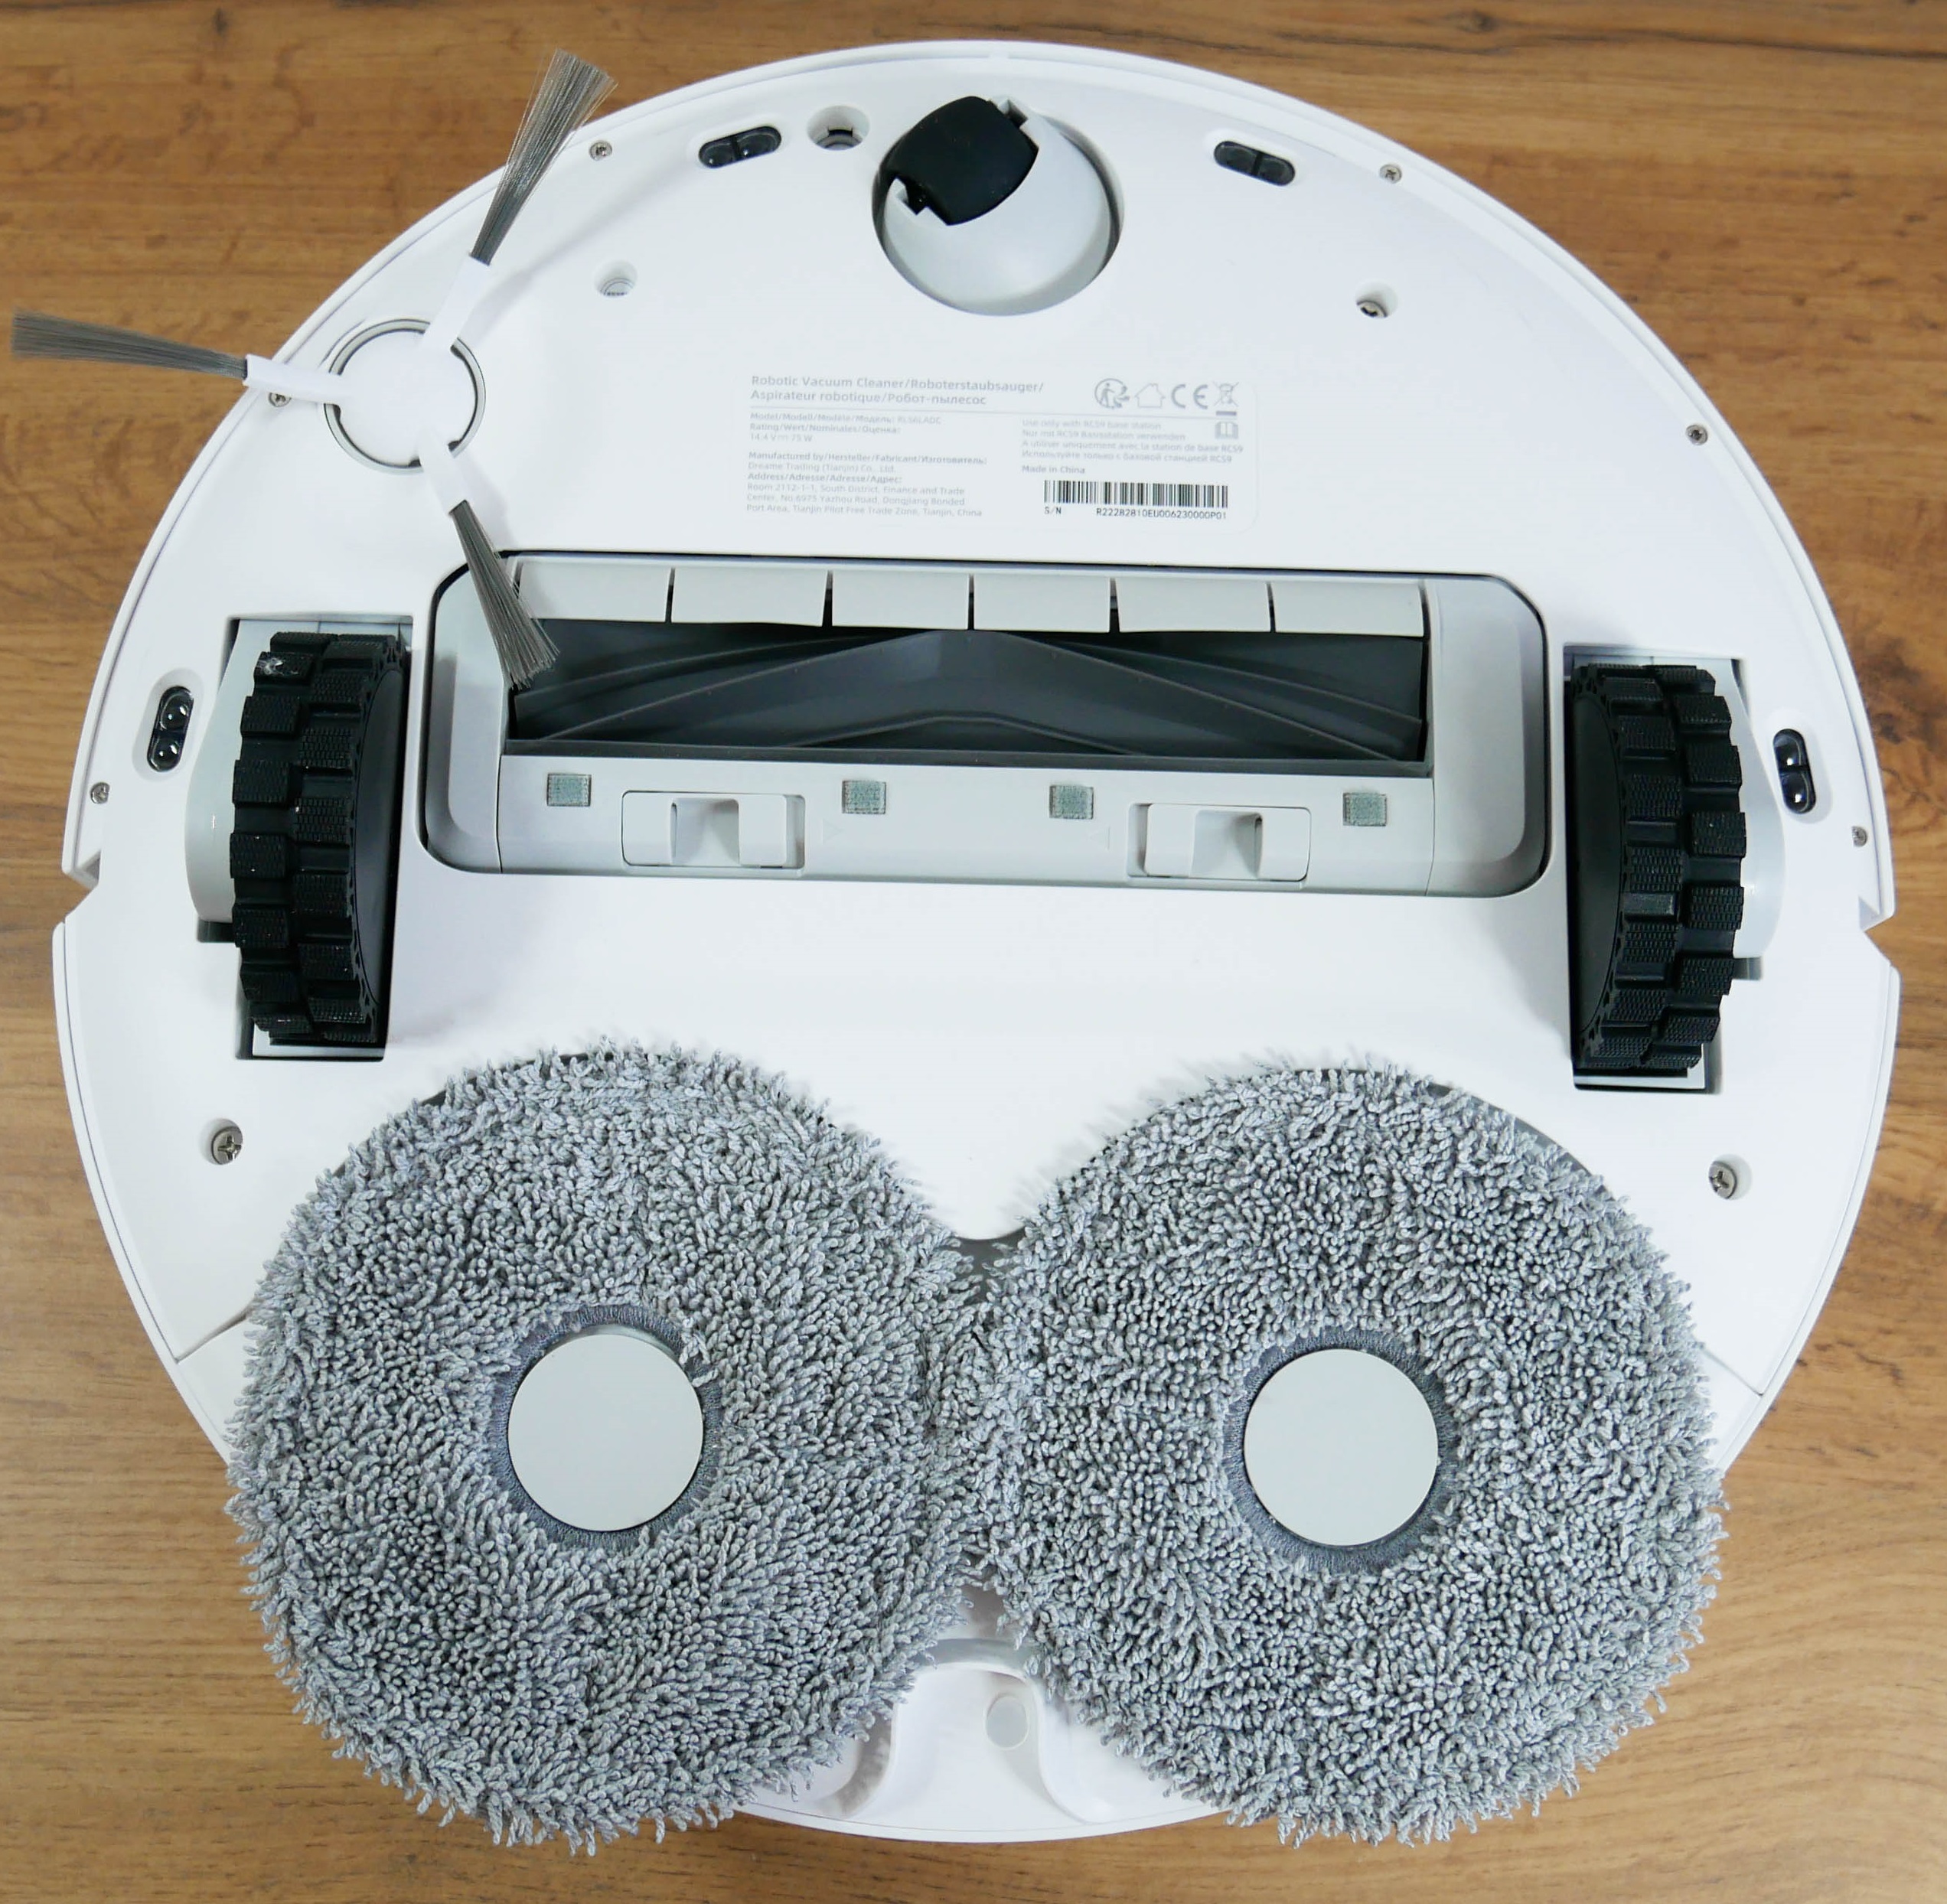 Is Dreame L10s Ultra SE the Best Robot Vacuum Cleaner?